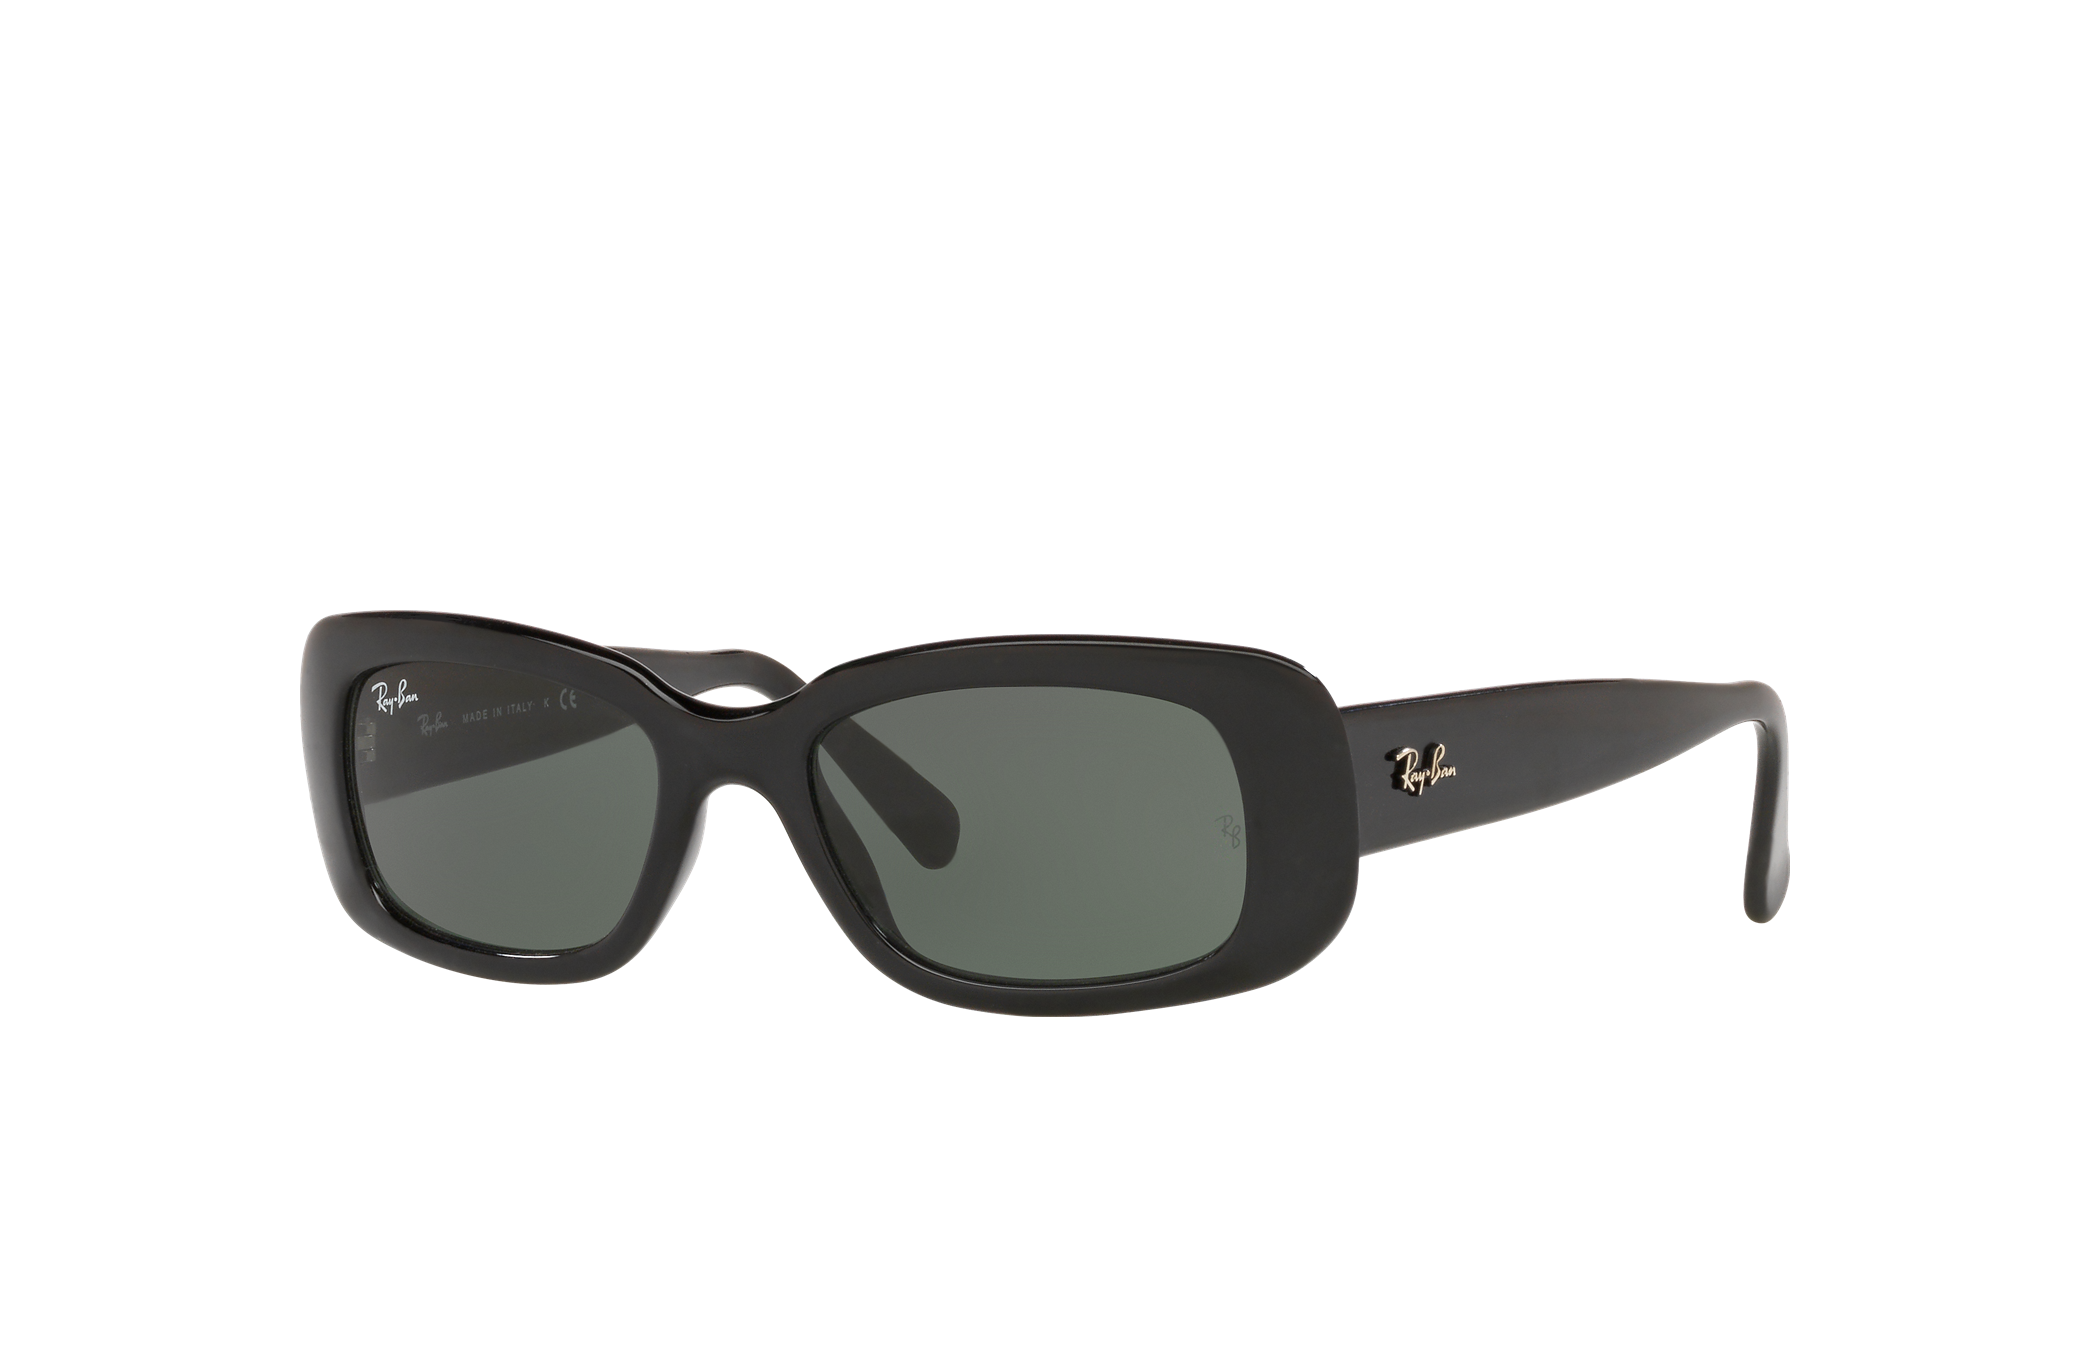 Rb4122 Sunglasses in Black and Green | Ray-Ban®